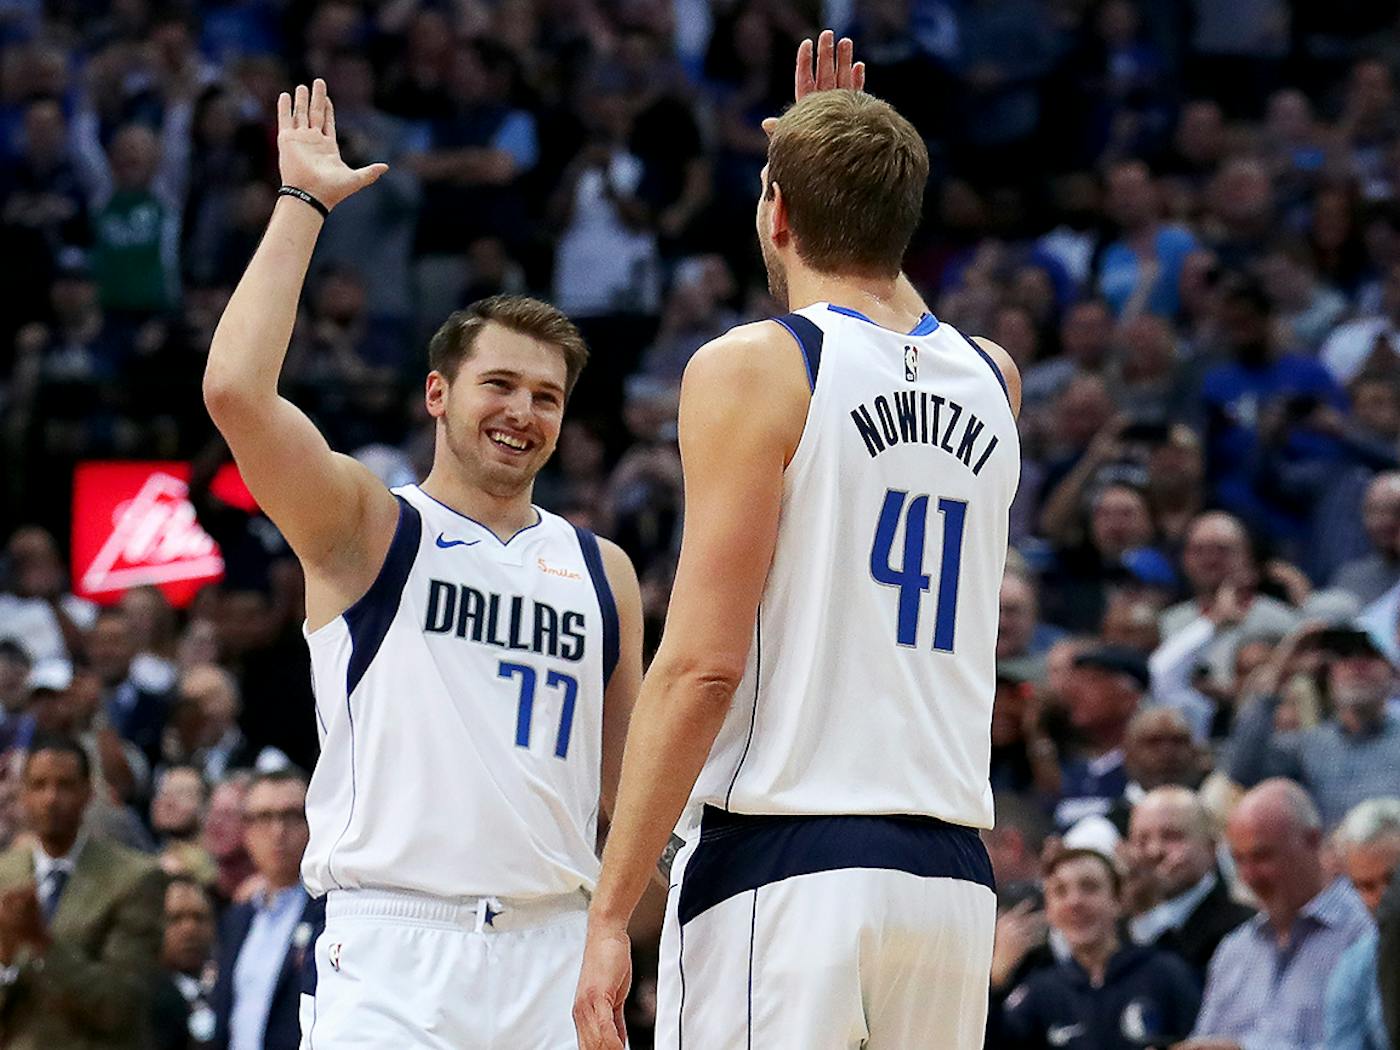 We View Him as a Spanish Boy': Luka Doncic's Return to Madrid - D